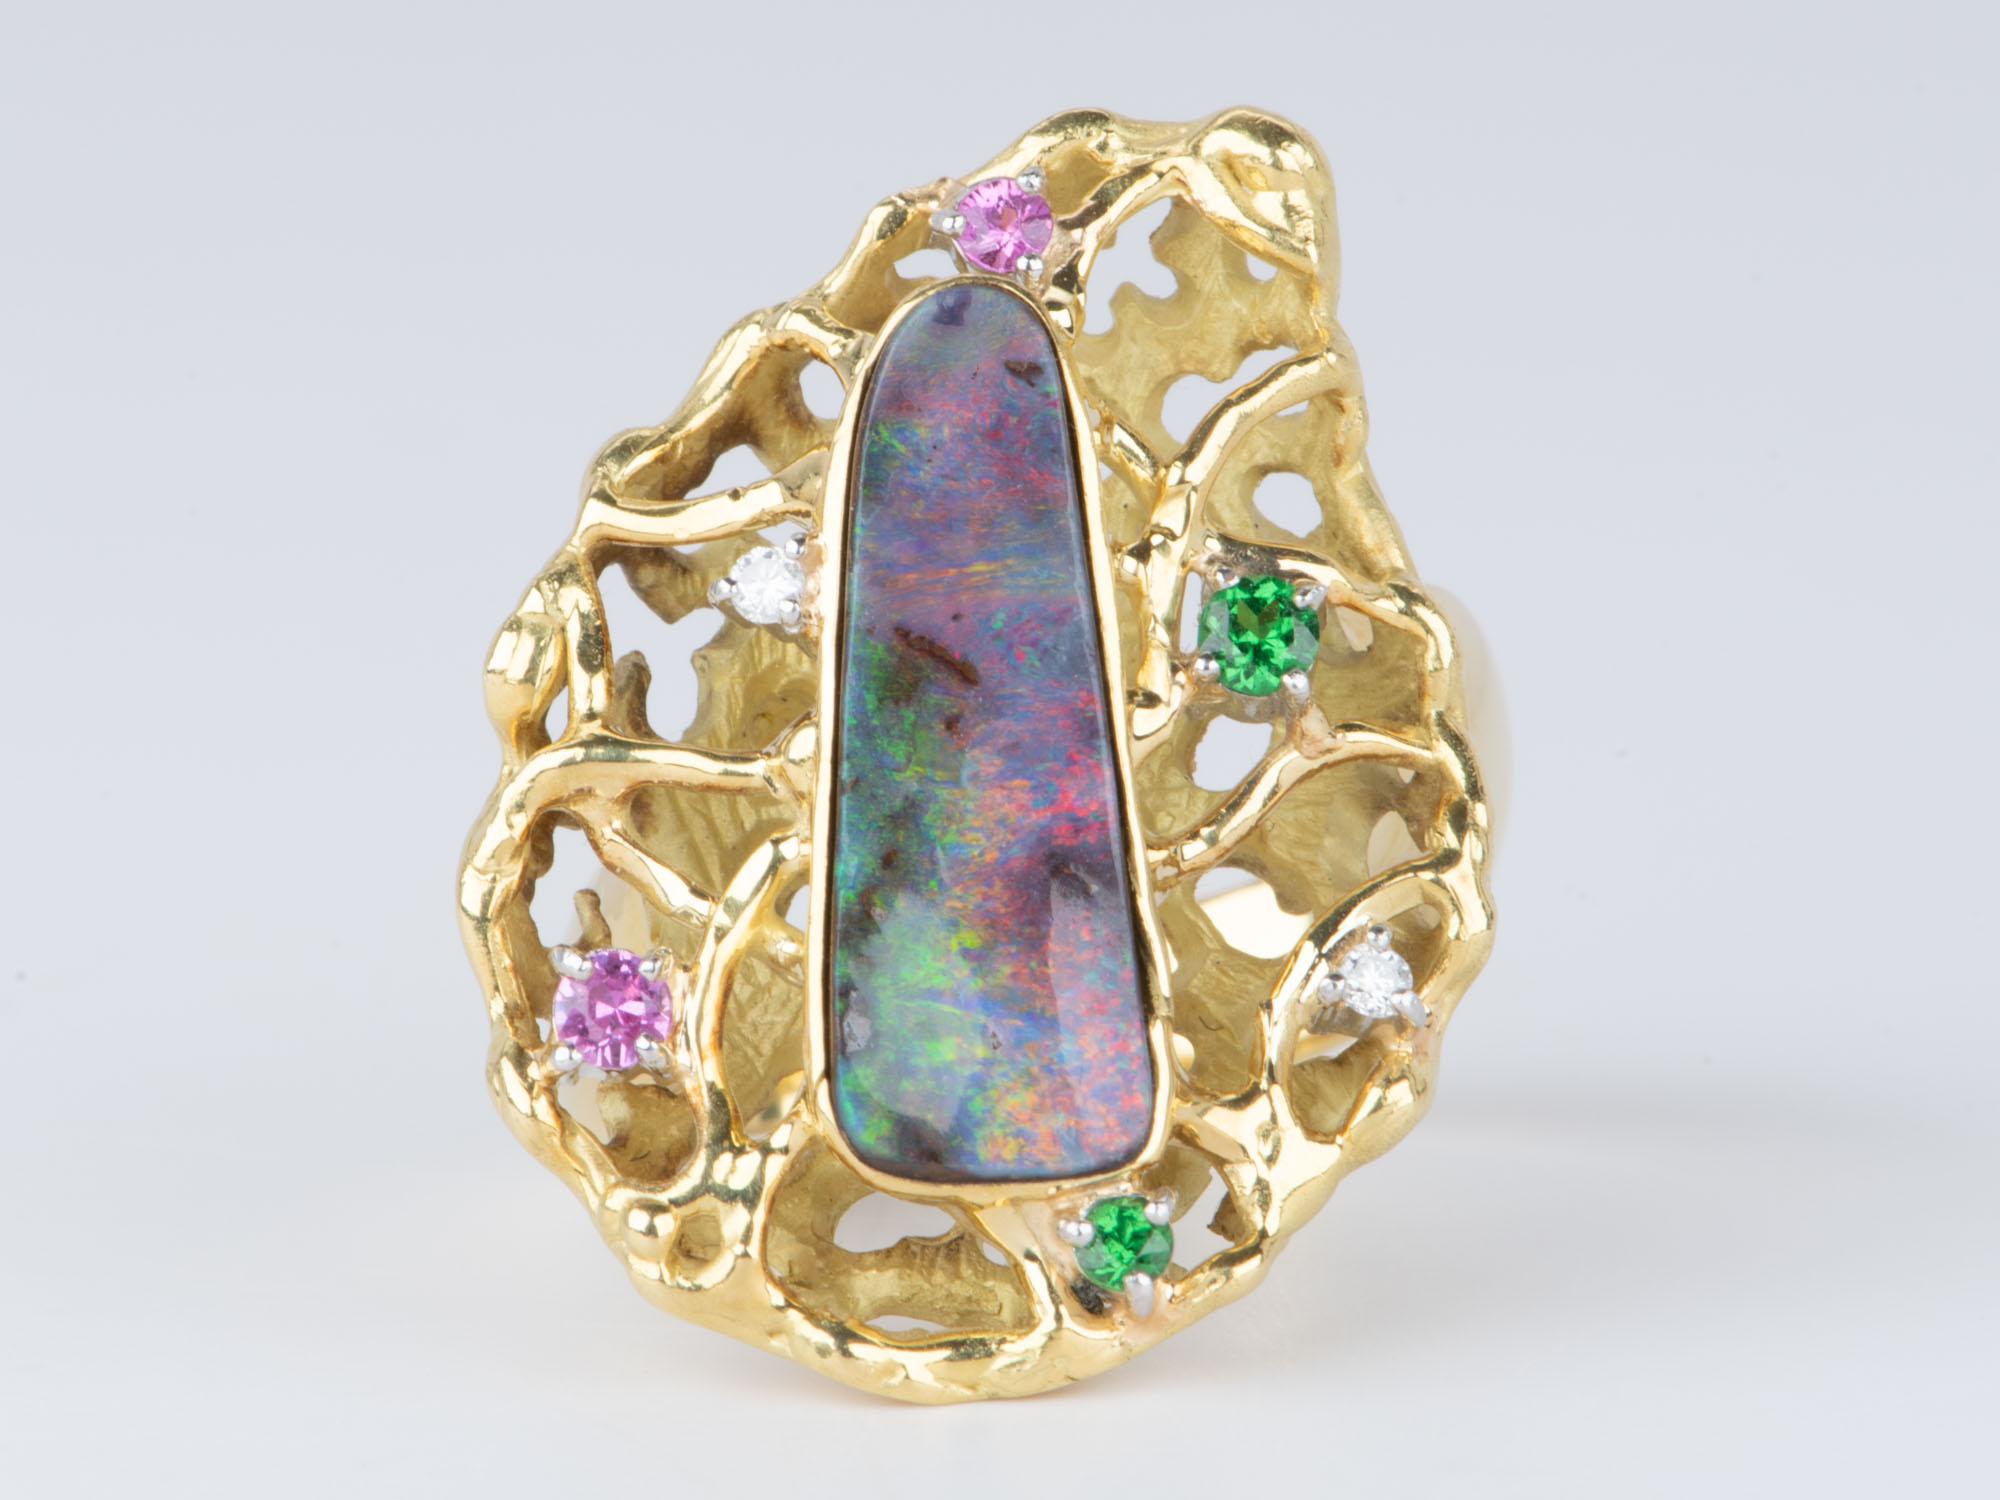 Behold this exquisite statement ring, crafted with a unique Australian boulder opal, set in a modernist organic floral head of solid 18K gold. Its colorful and intricate design is perfect for the luxury-seeking trendsetter, ready to make a bold